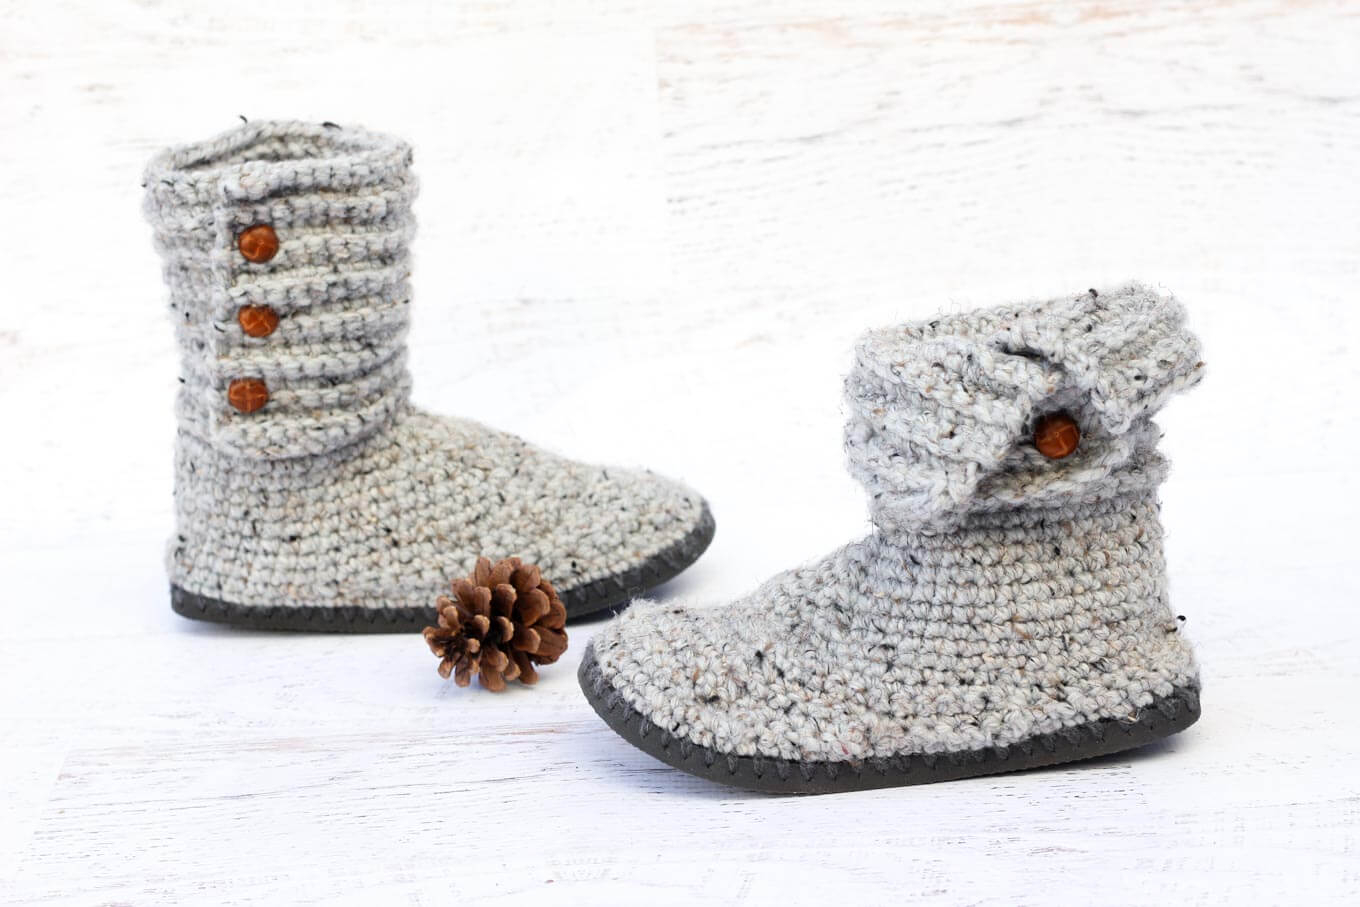 Knitting Patterns For Slipper Boots How To Crochet Boots With Flip Flops Free Pattern Video Tutorial